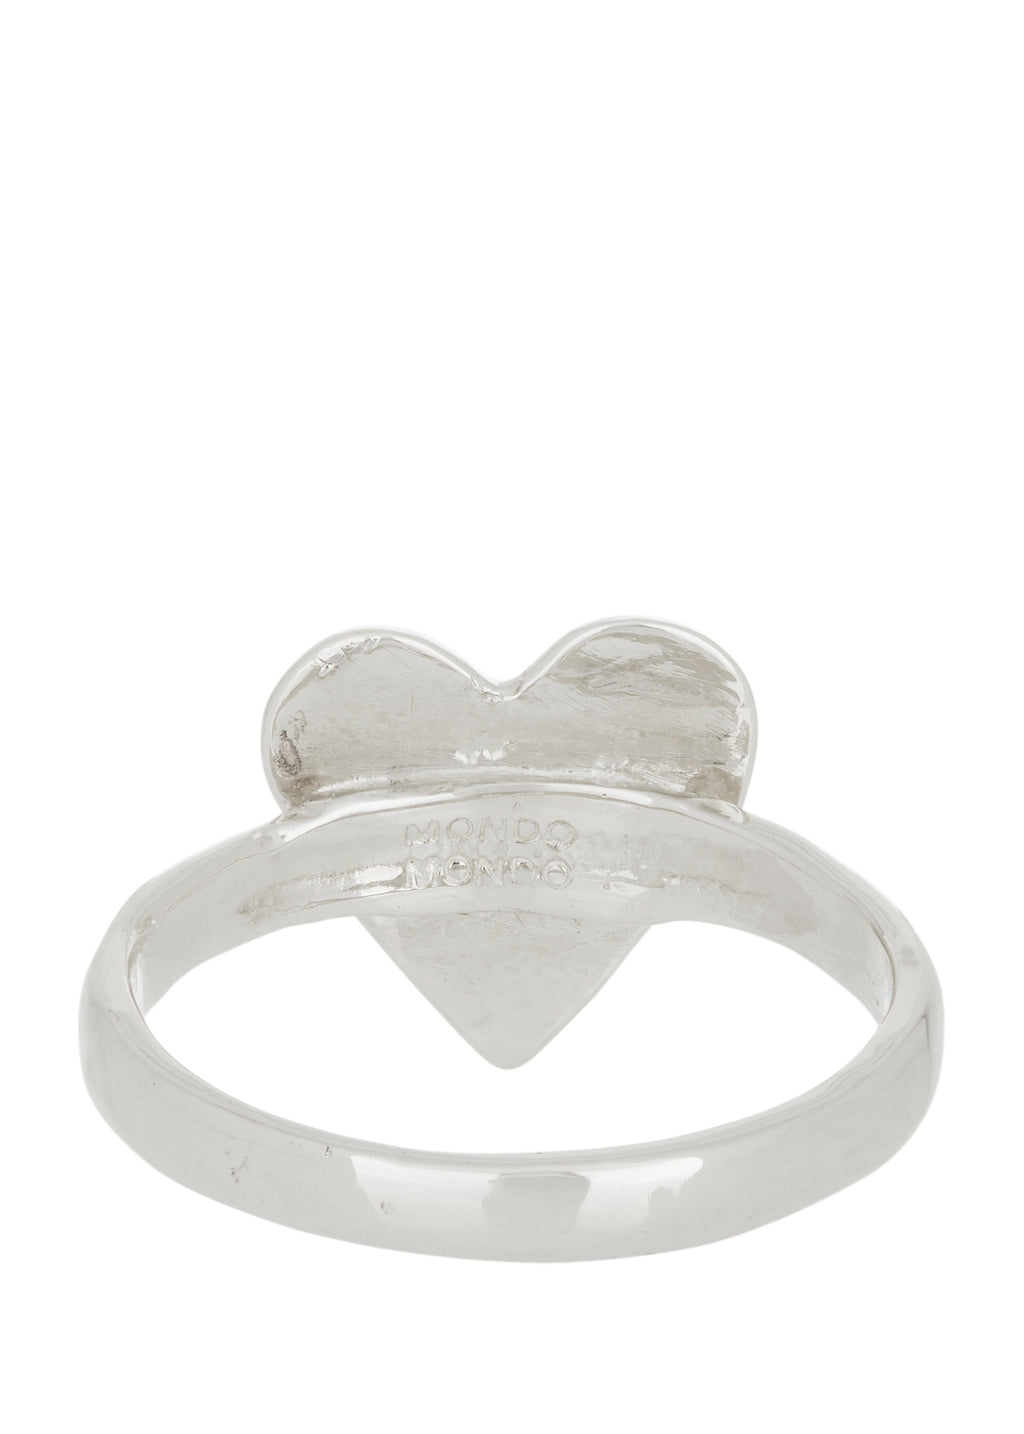 Heart Ring with Star Setting in Sterling Silver – Mondo Mondo